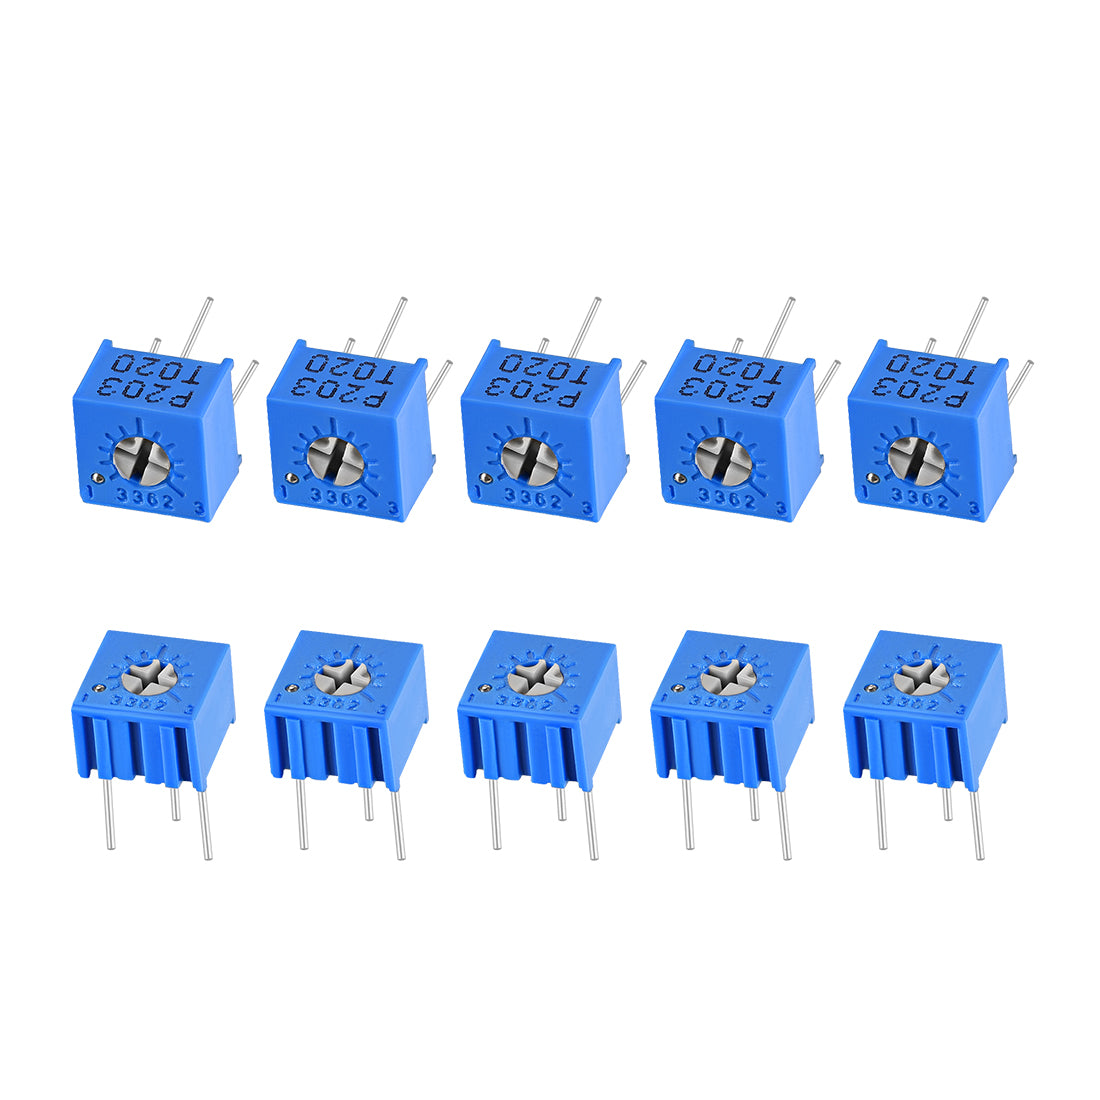 uxcell Uxcell 3362 Trimmer Potentiometer 20K Ohm Top Adjustment Horizontal Variable Resistors 10Pcs